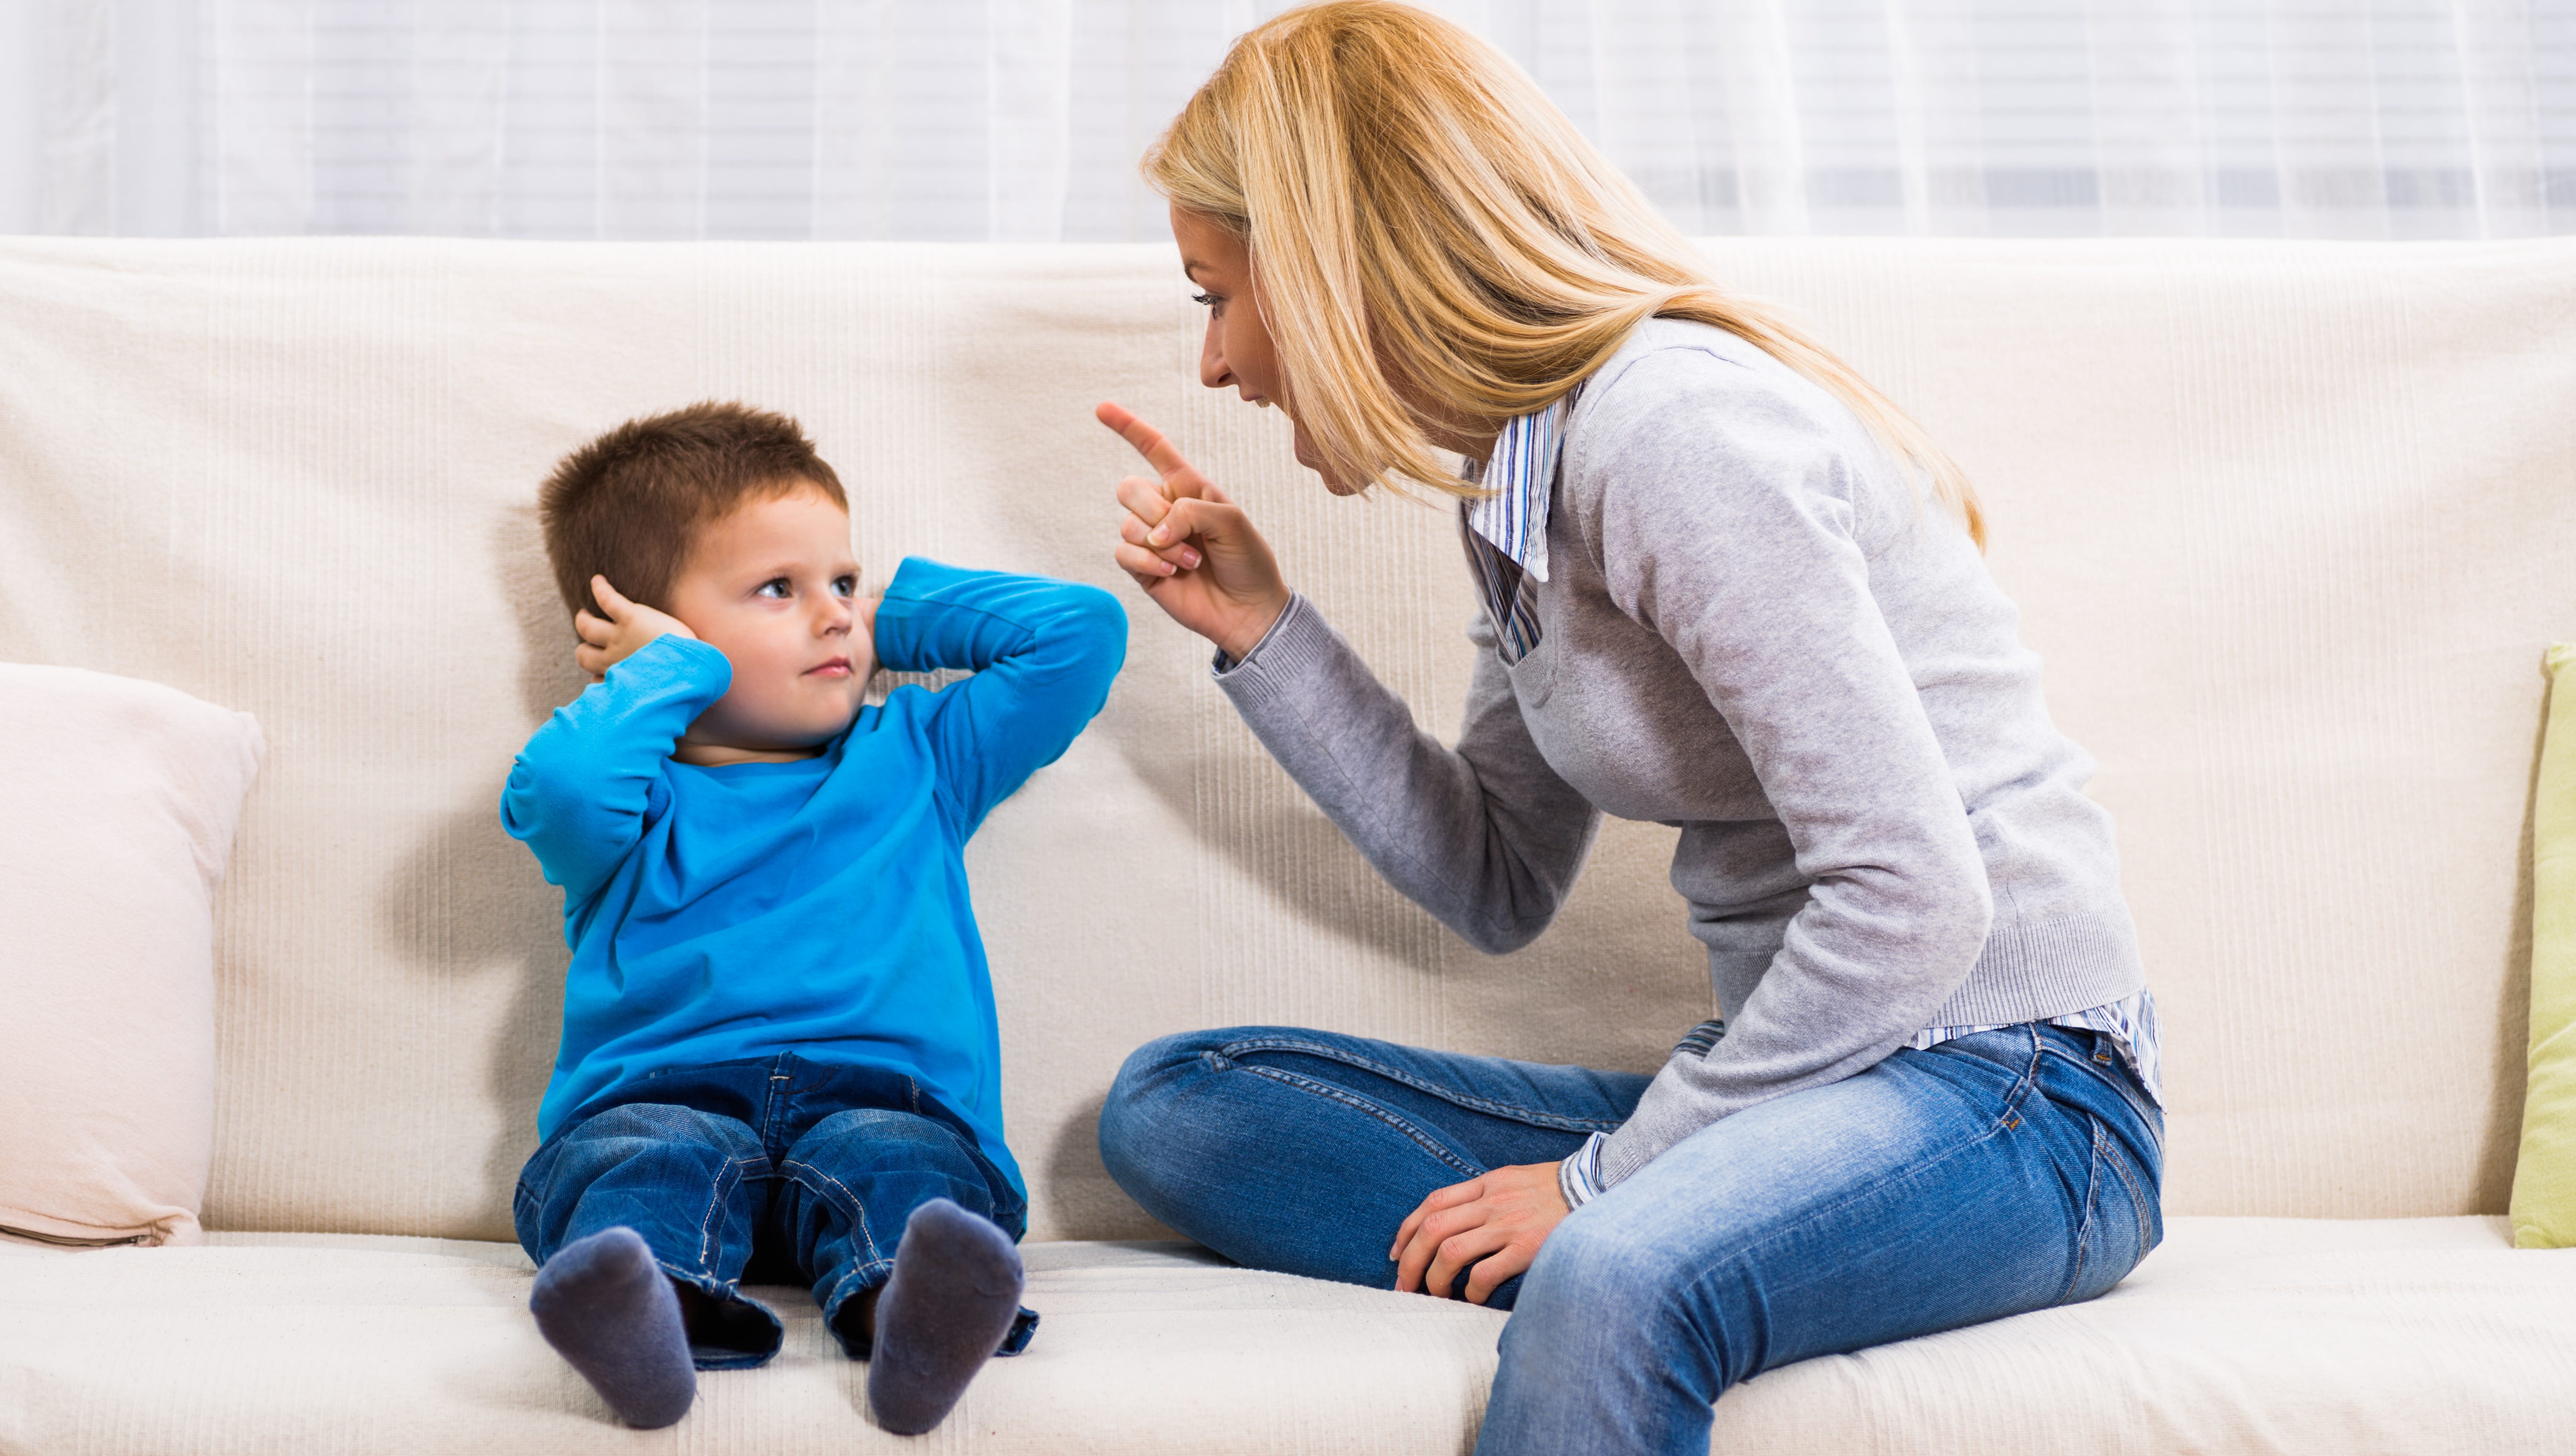 Parents, yelling may harm kids more than you realize